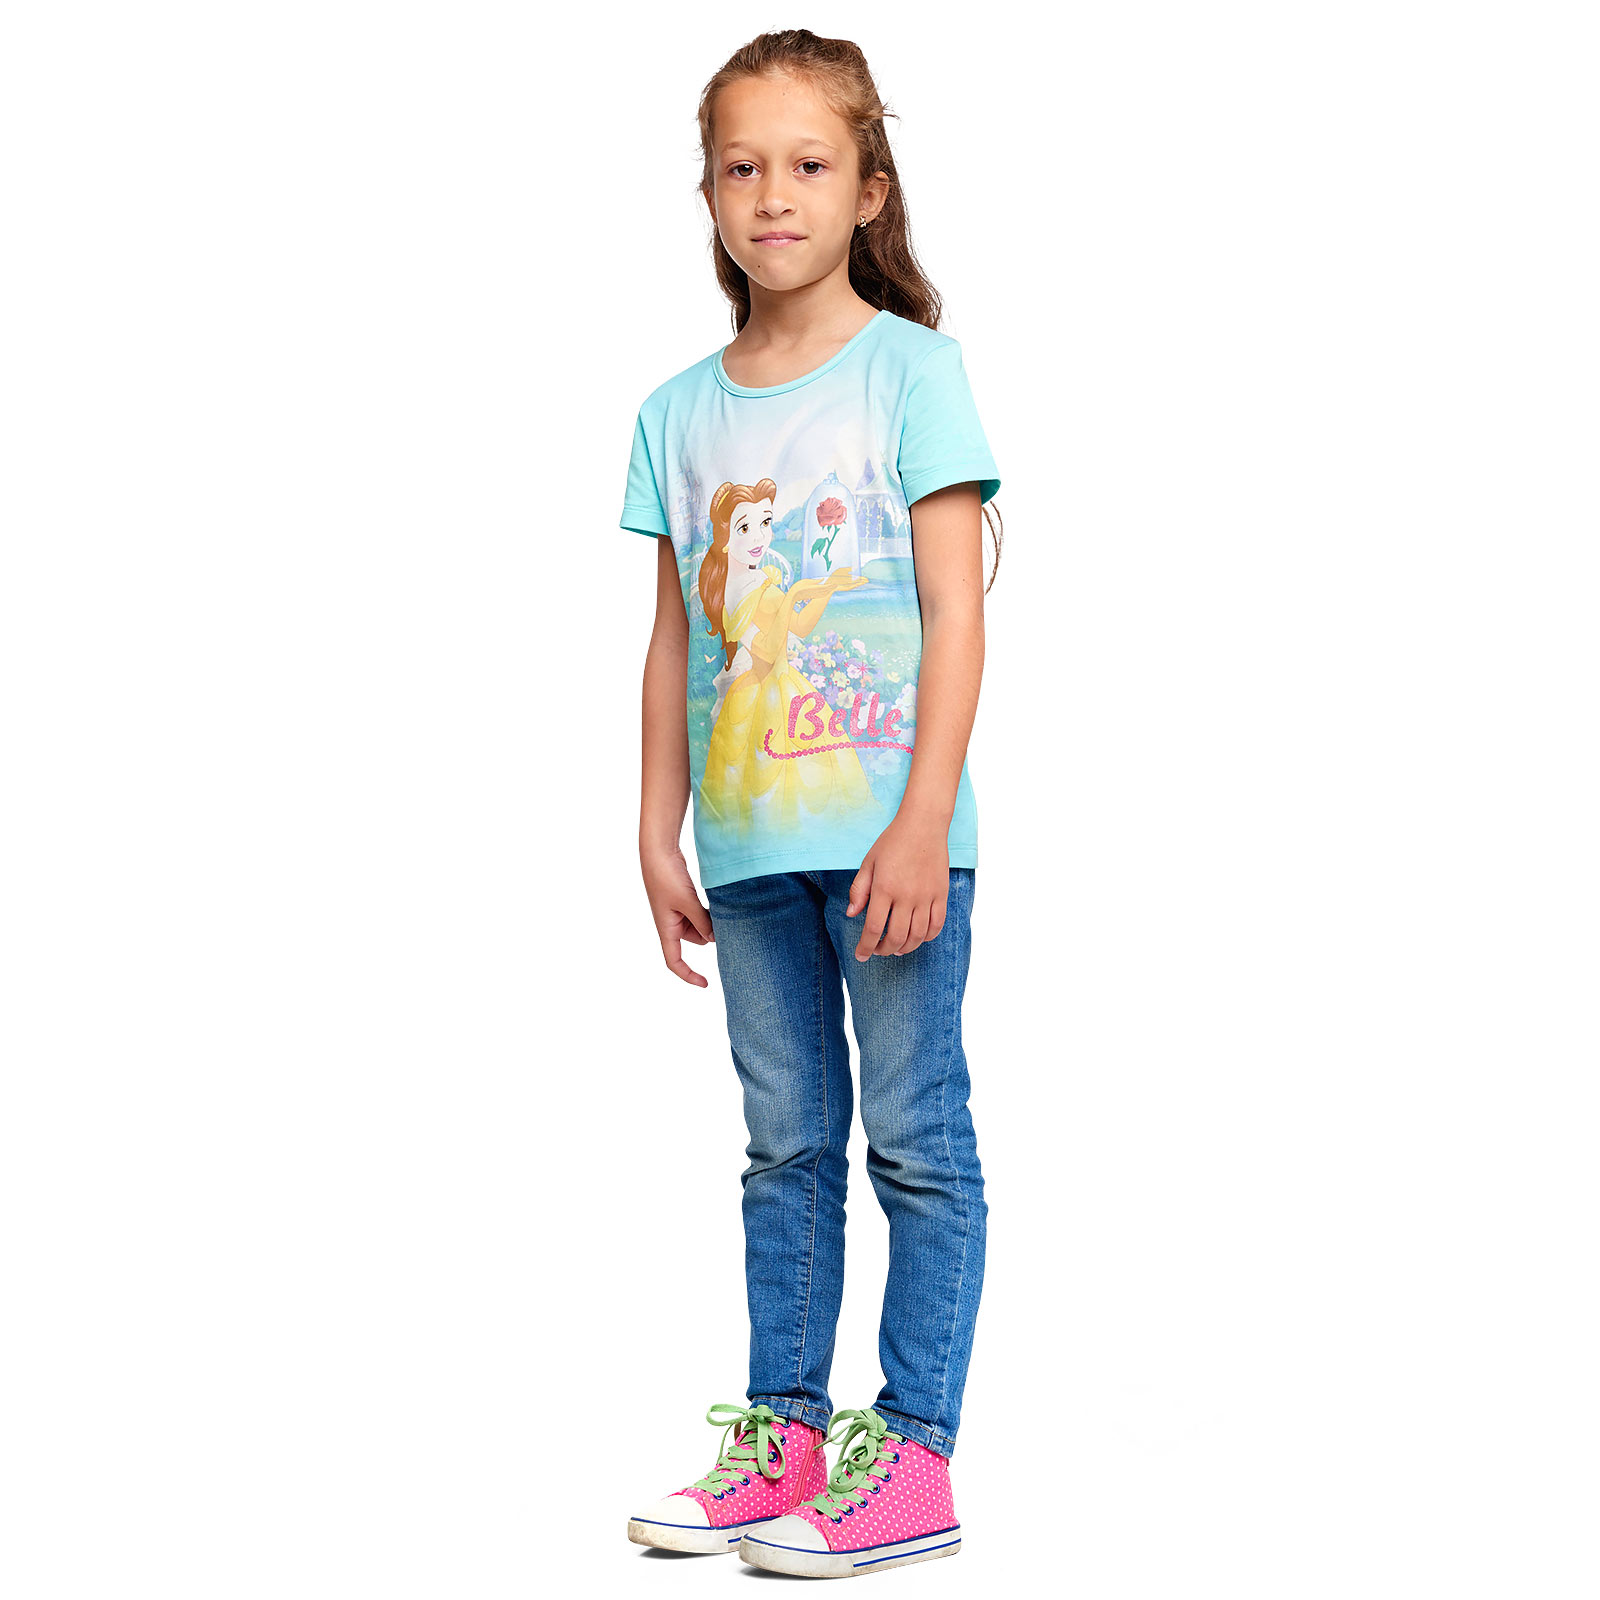 Beauty and the Beast - Belle Children's T-Shirt Turquoise